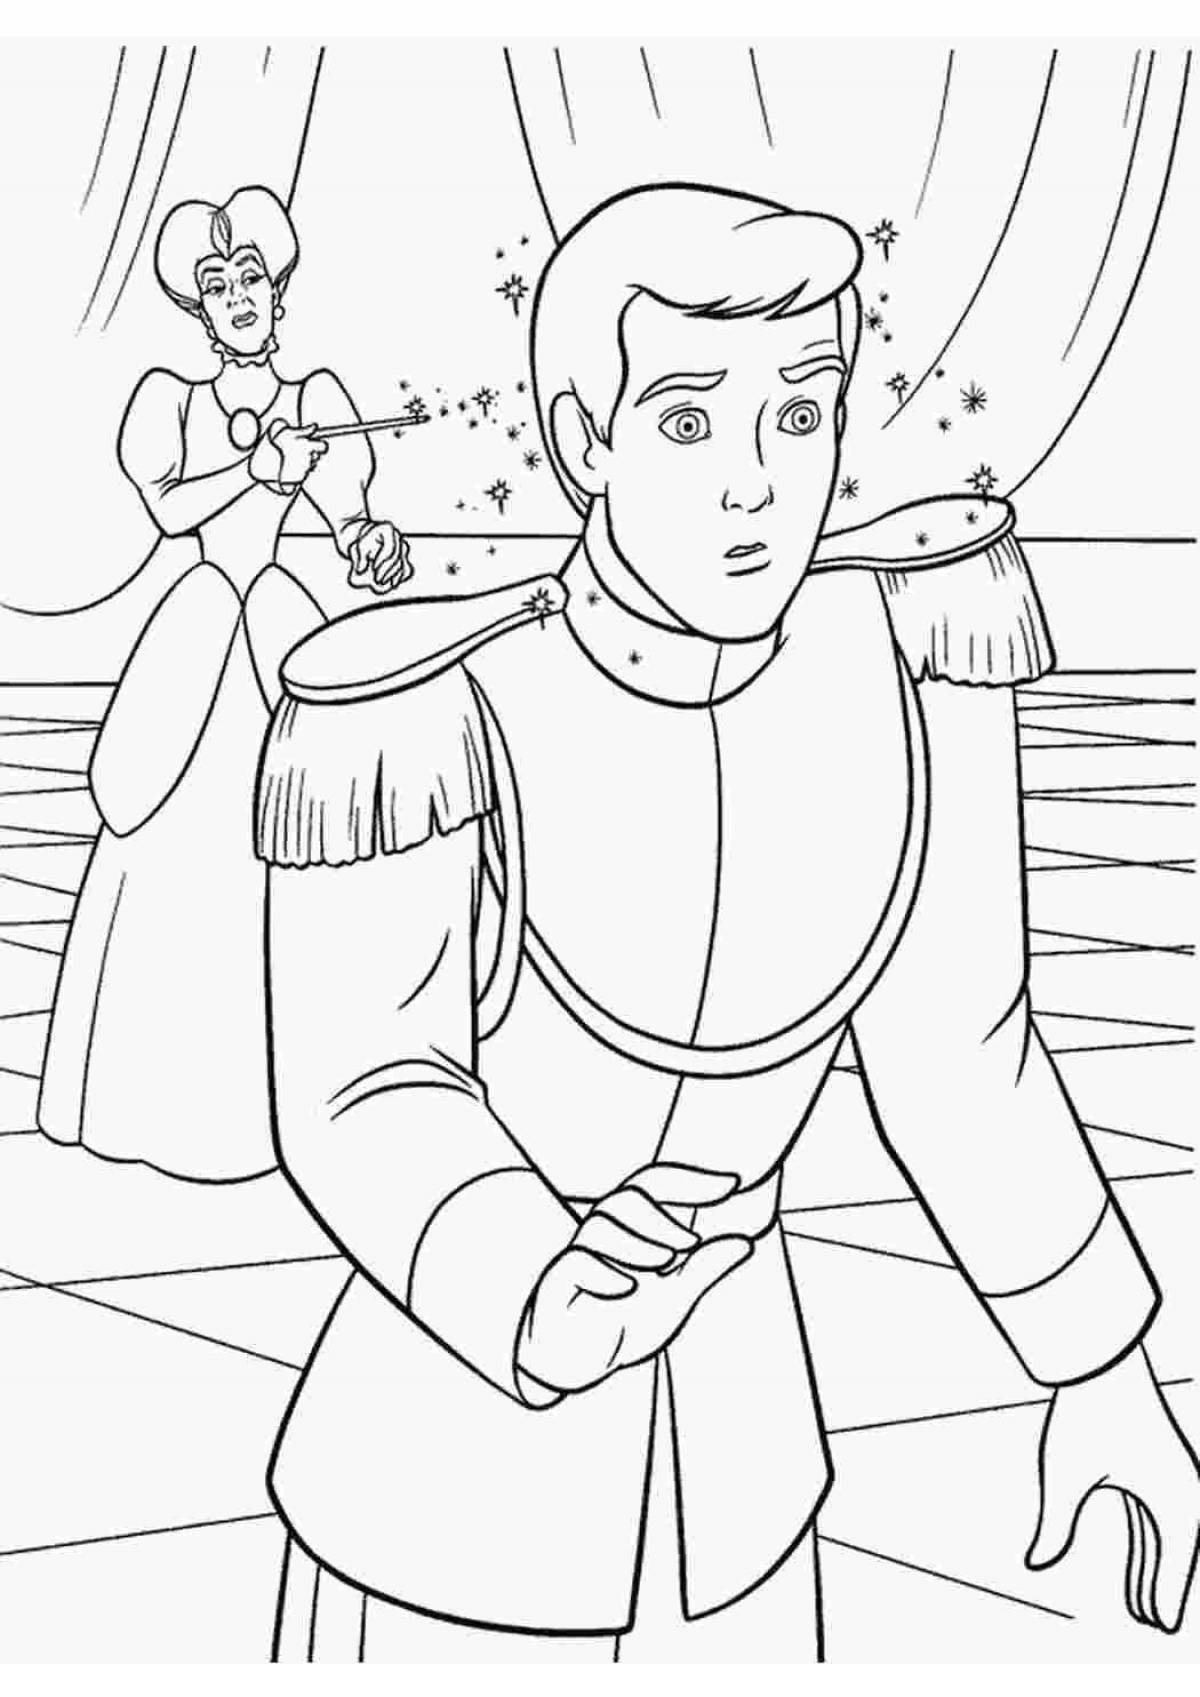 Exalted prince handsome coloring book